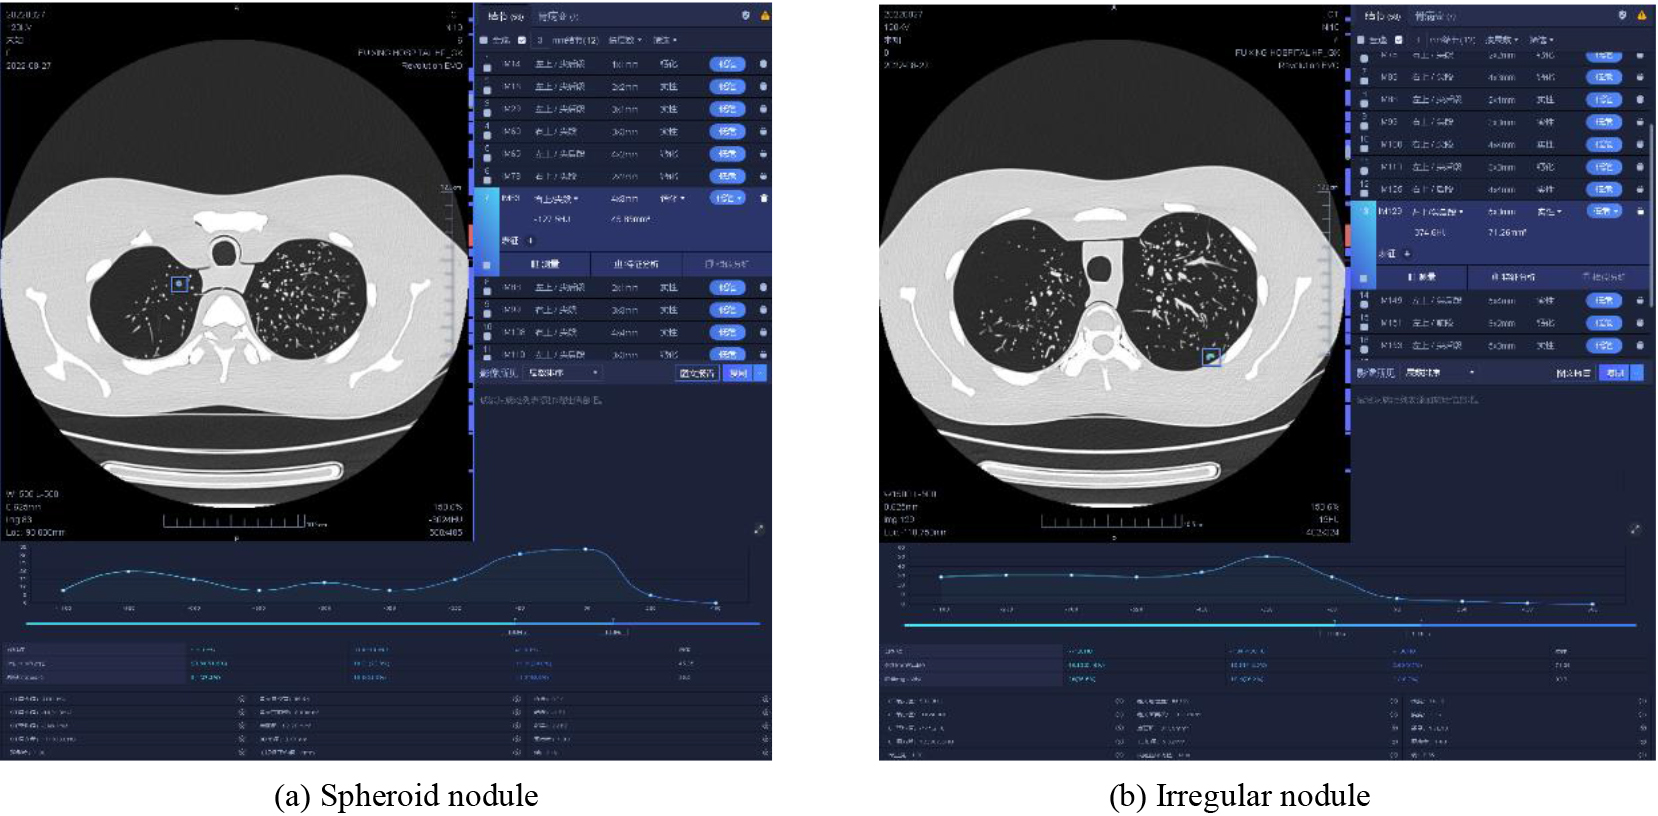 AI recognition of pulmonary nodules in different types of CT images.